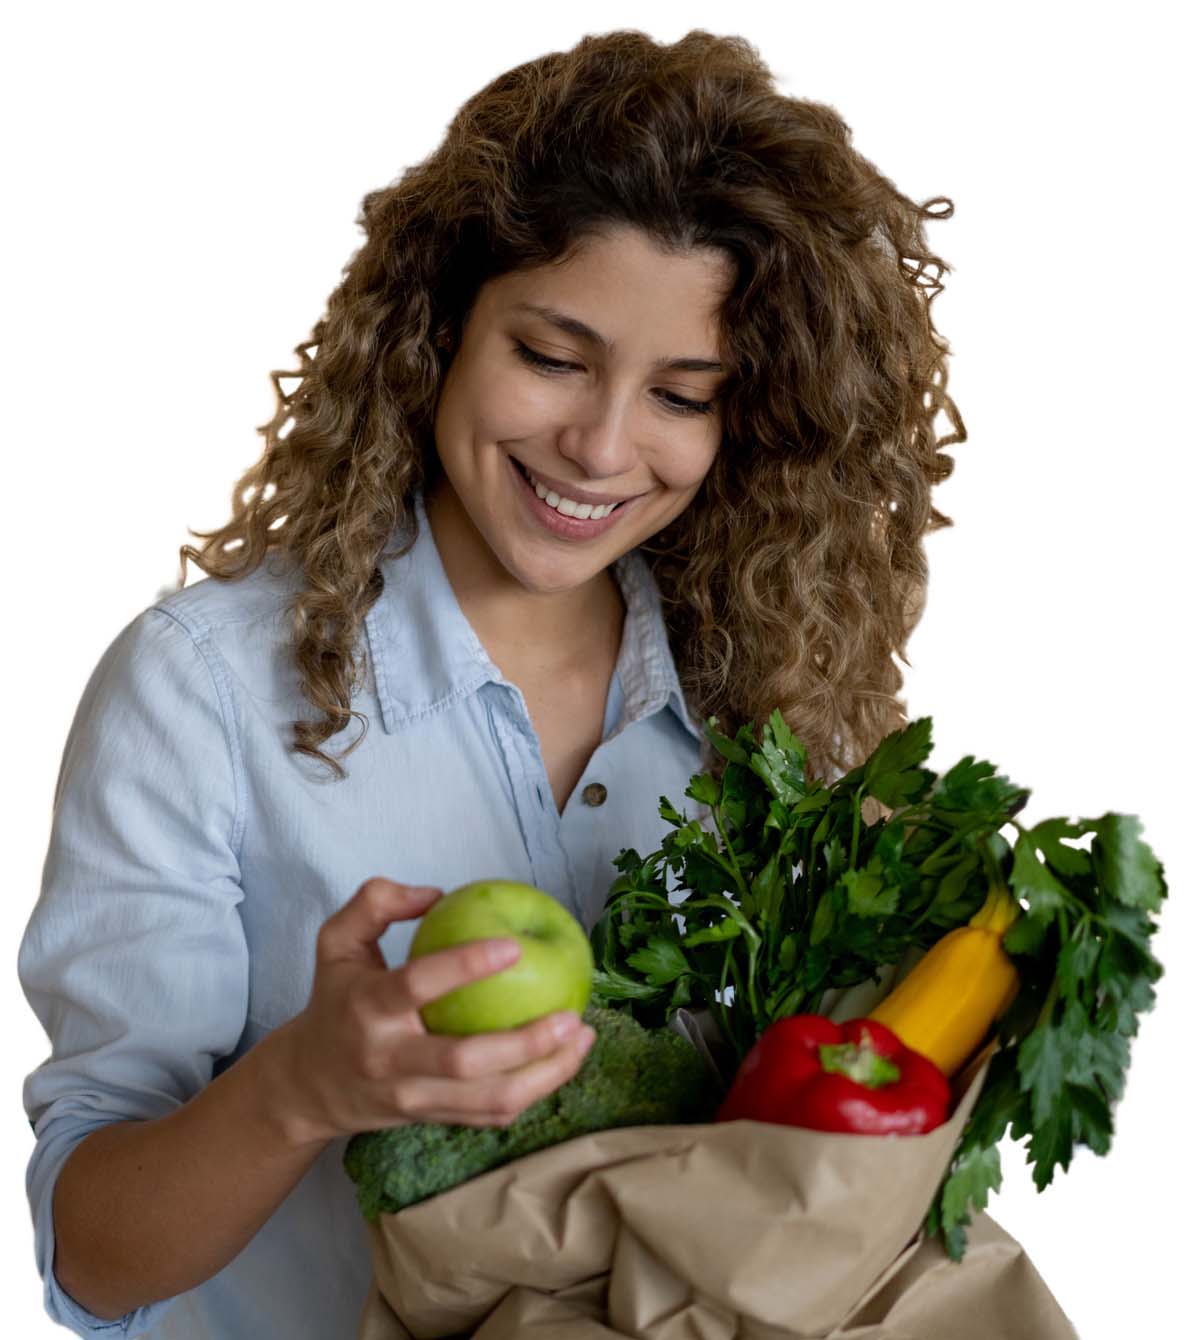 Prescription fruits and vegetables work to improve heart health